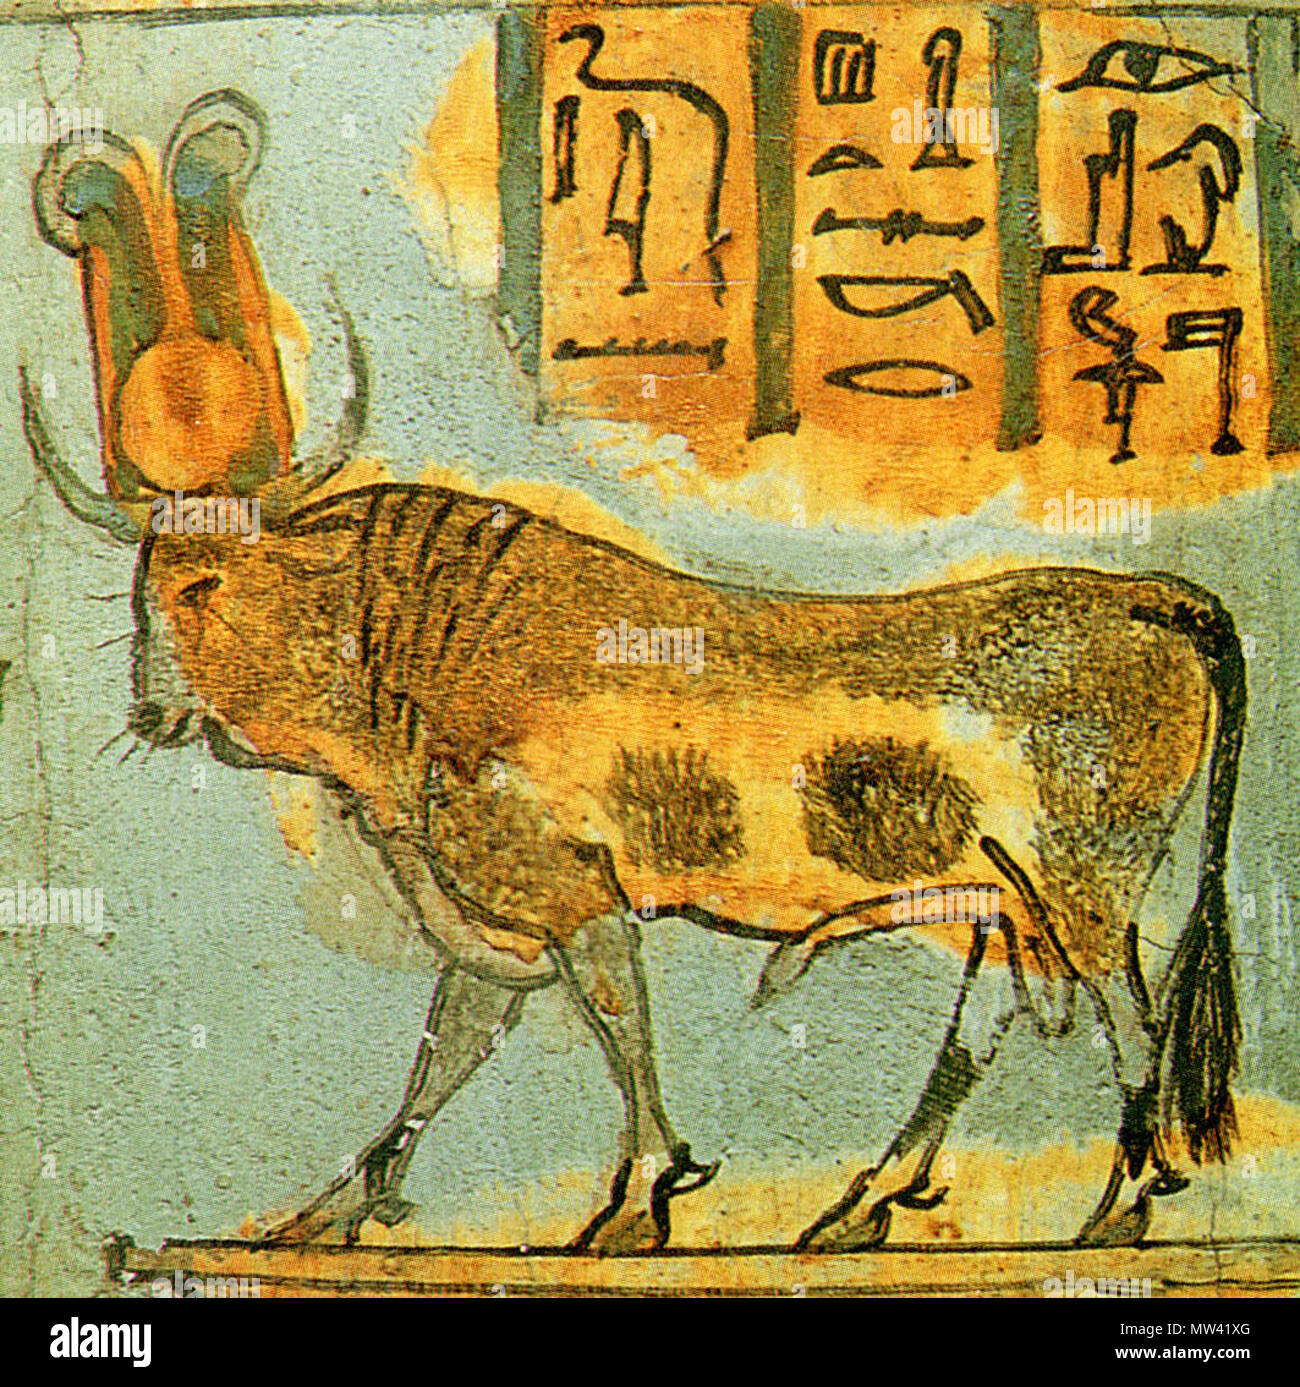 . English: The sacred Apis bull shown on a Twenty-first dynasty Egyptian coffin. Photograph published 1997; artwork created c. 1000 BC. Photographed by Michael Holford. Original artist unknown. 53 Apis bull on coffin Stock Photo